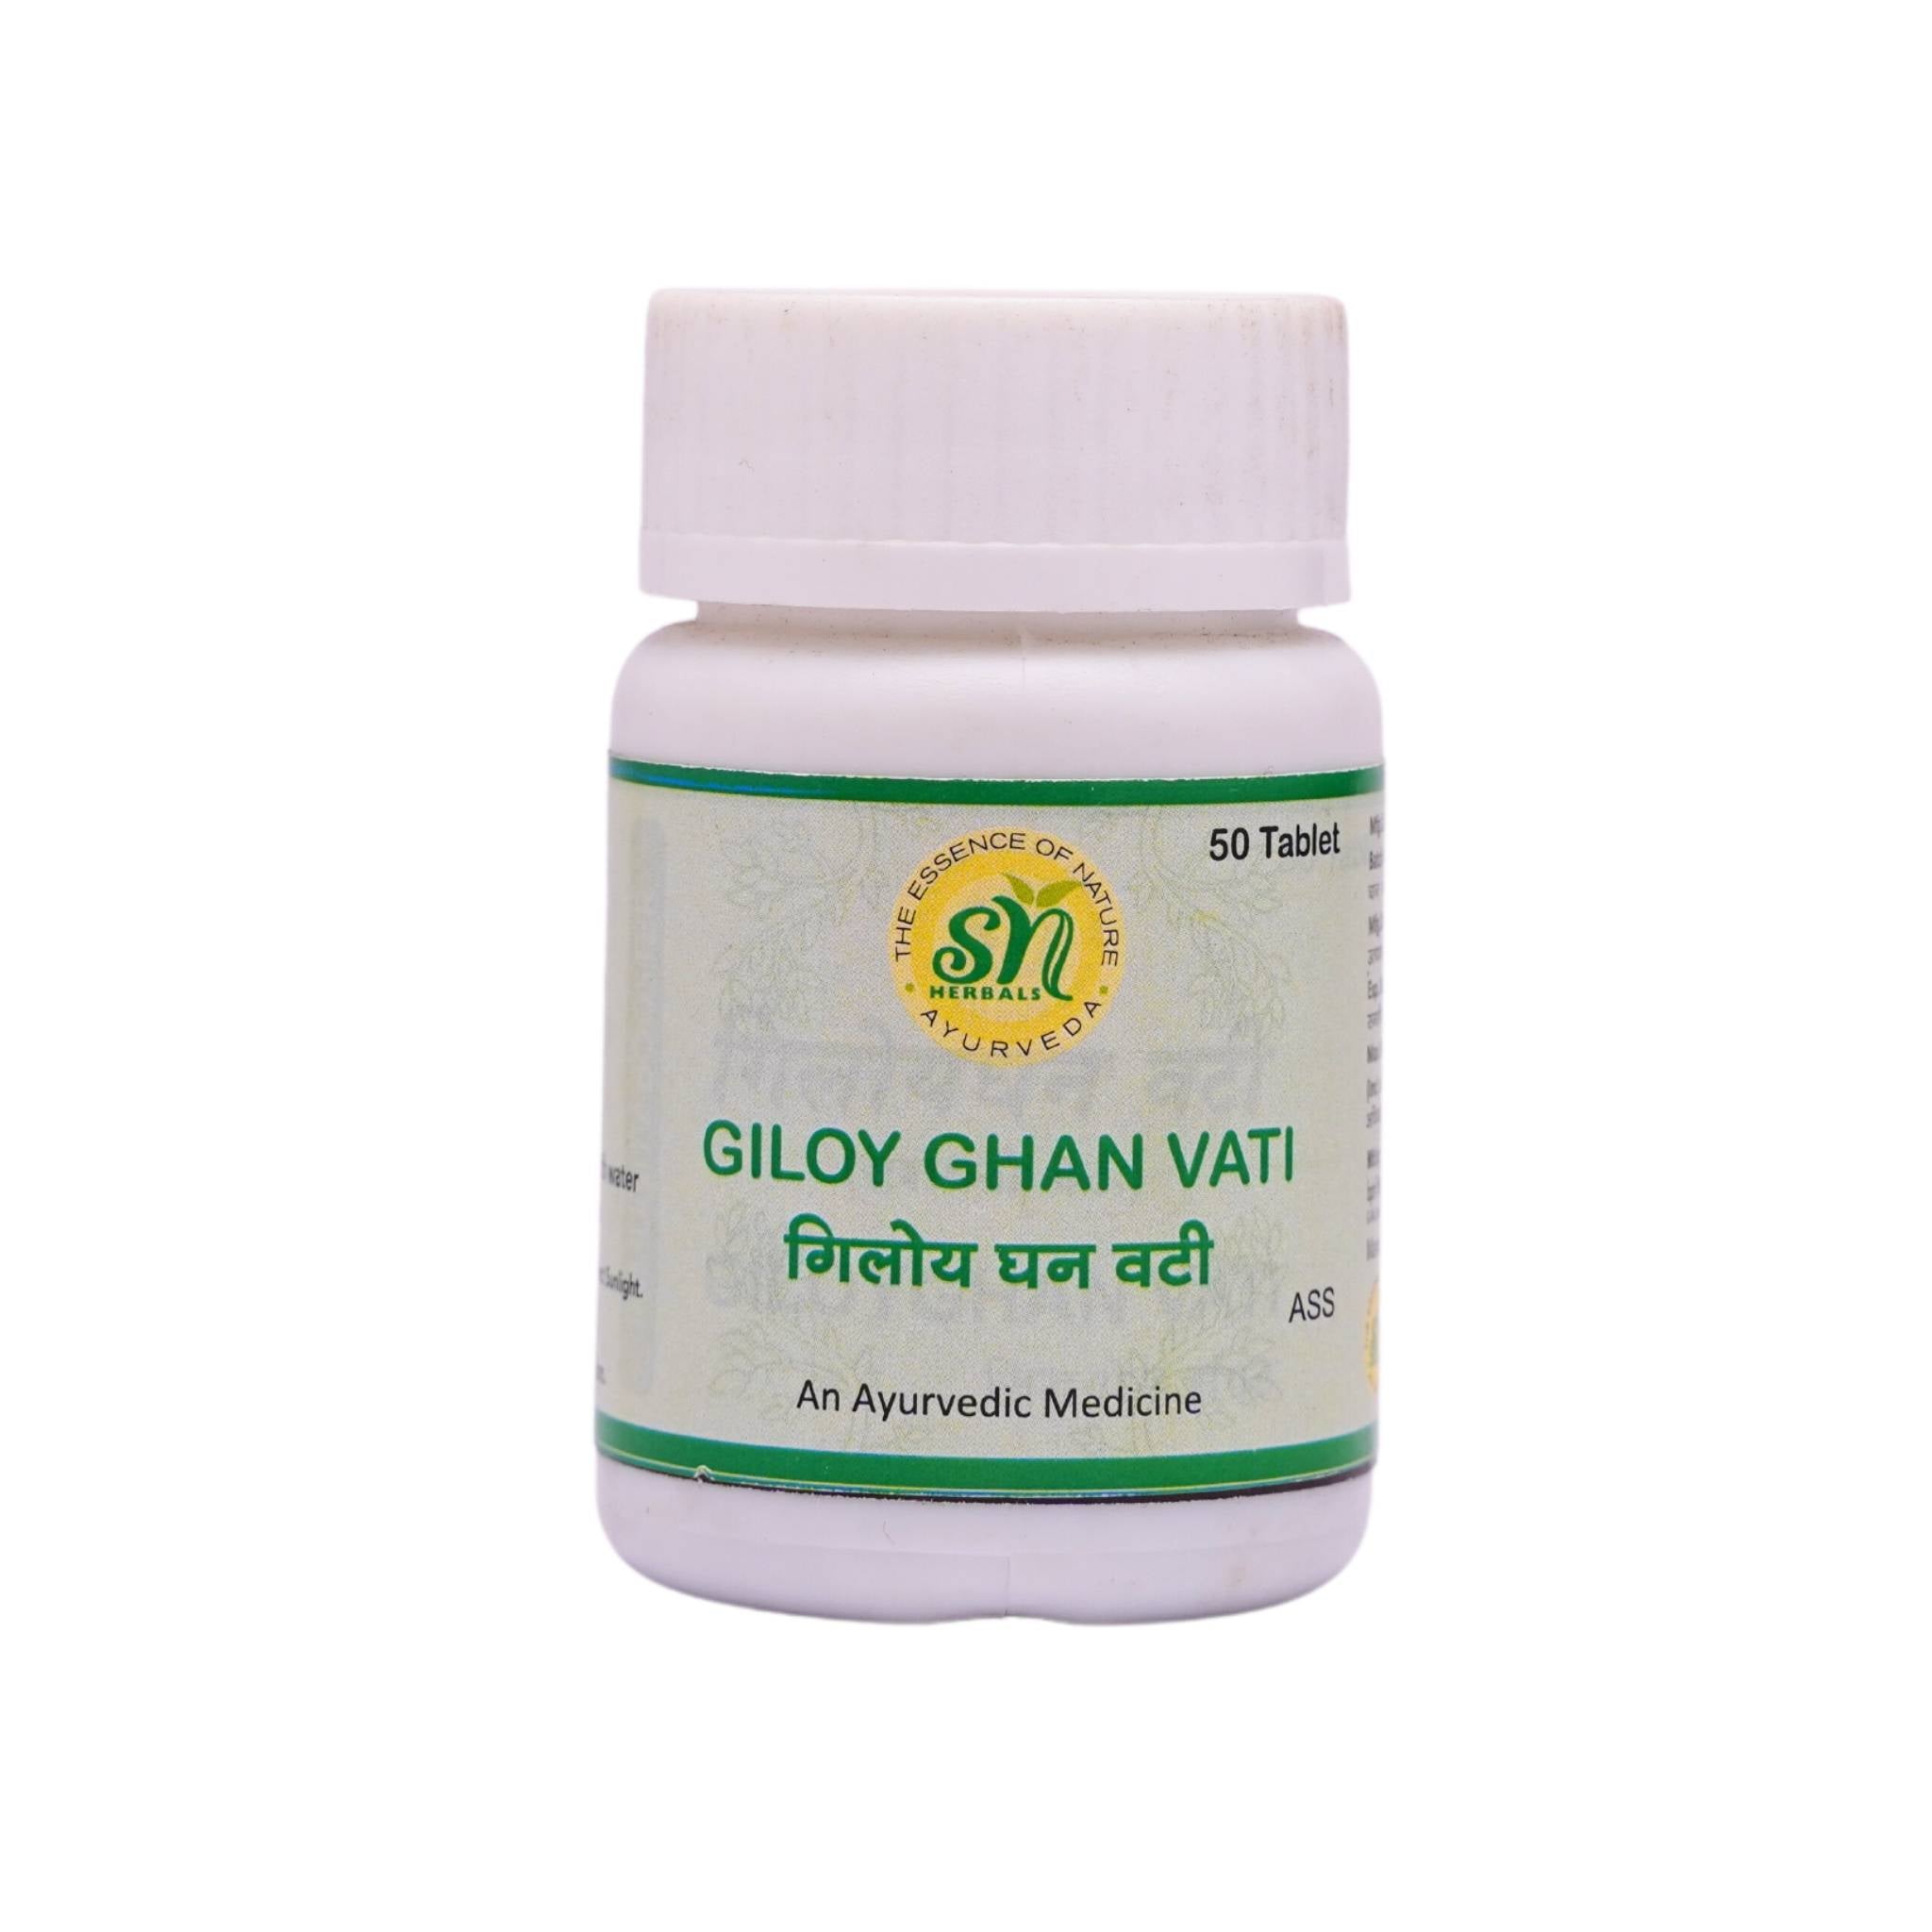 GHILOY GHAN VATI Bottle of  50 QTY